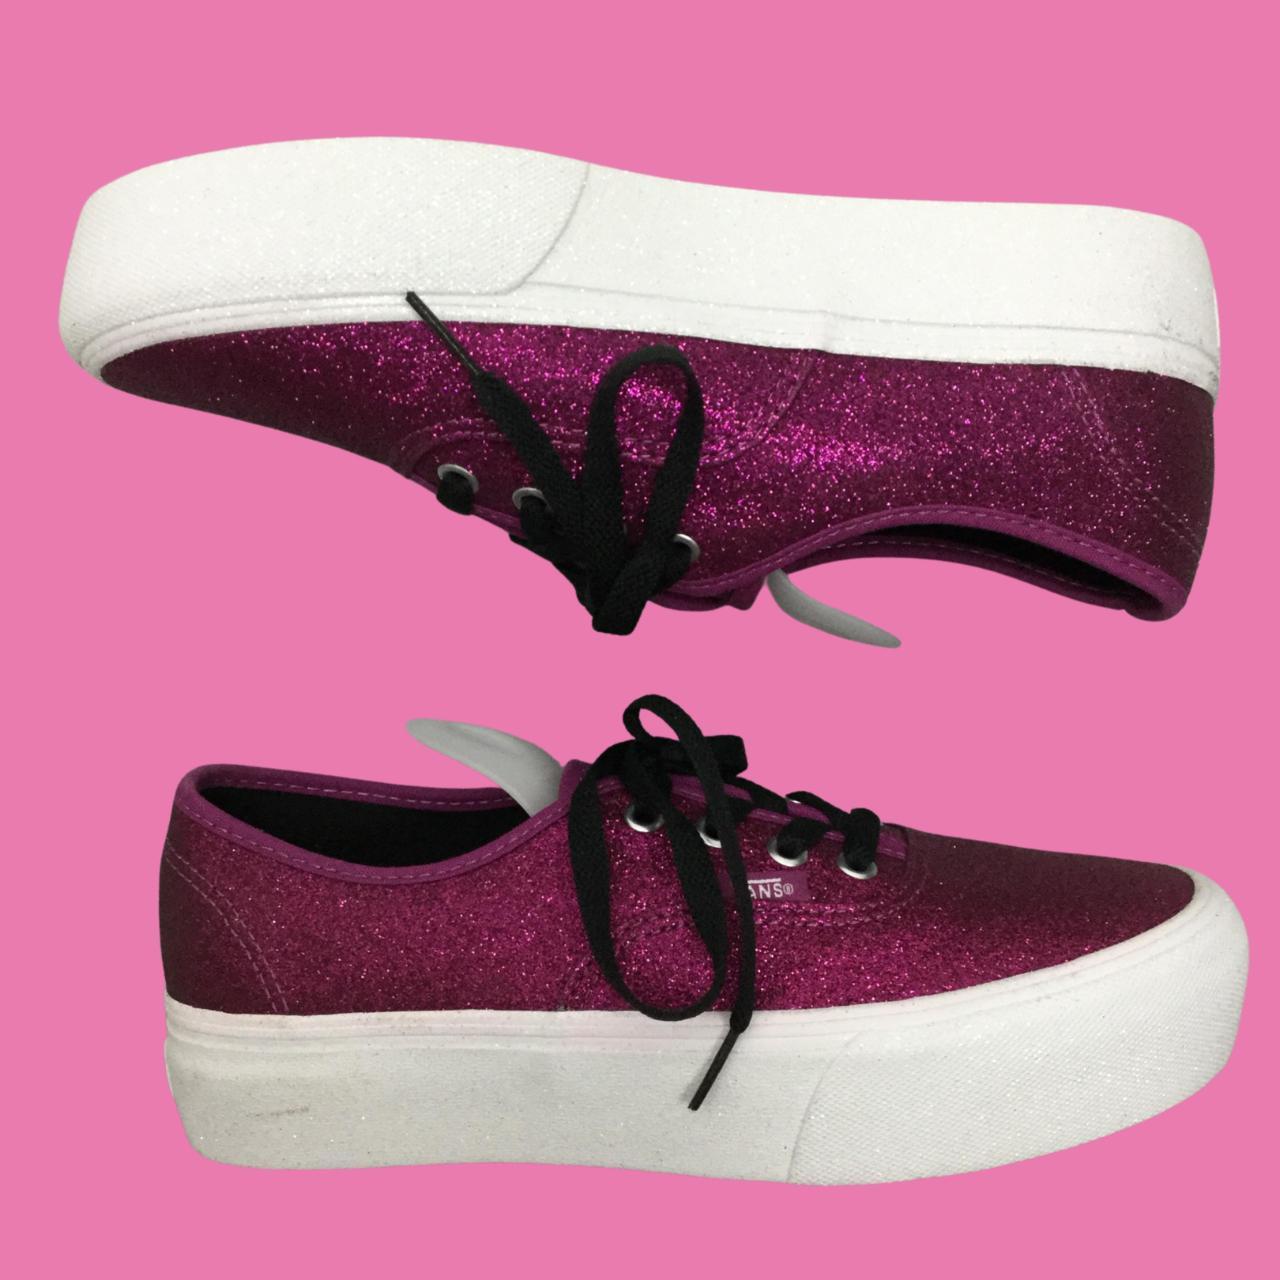 Product Image 1 - D8-08
VANS Trainers
-Glittered 
-Purple
-Lace up
-Ankle rise

Condition-